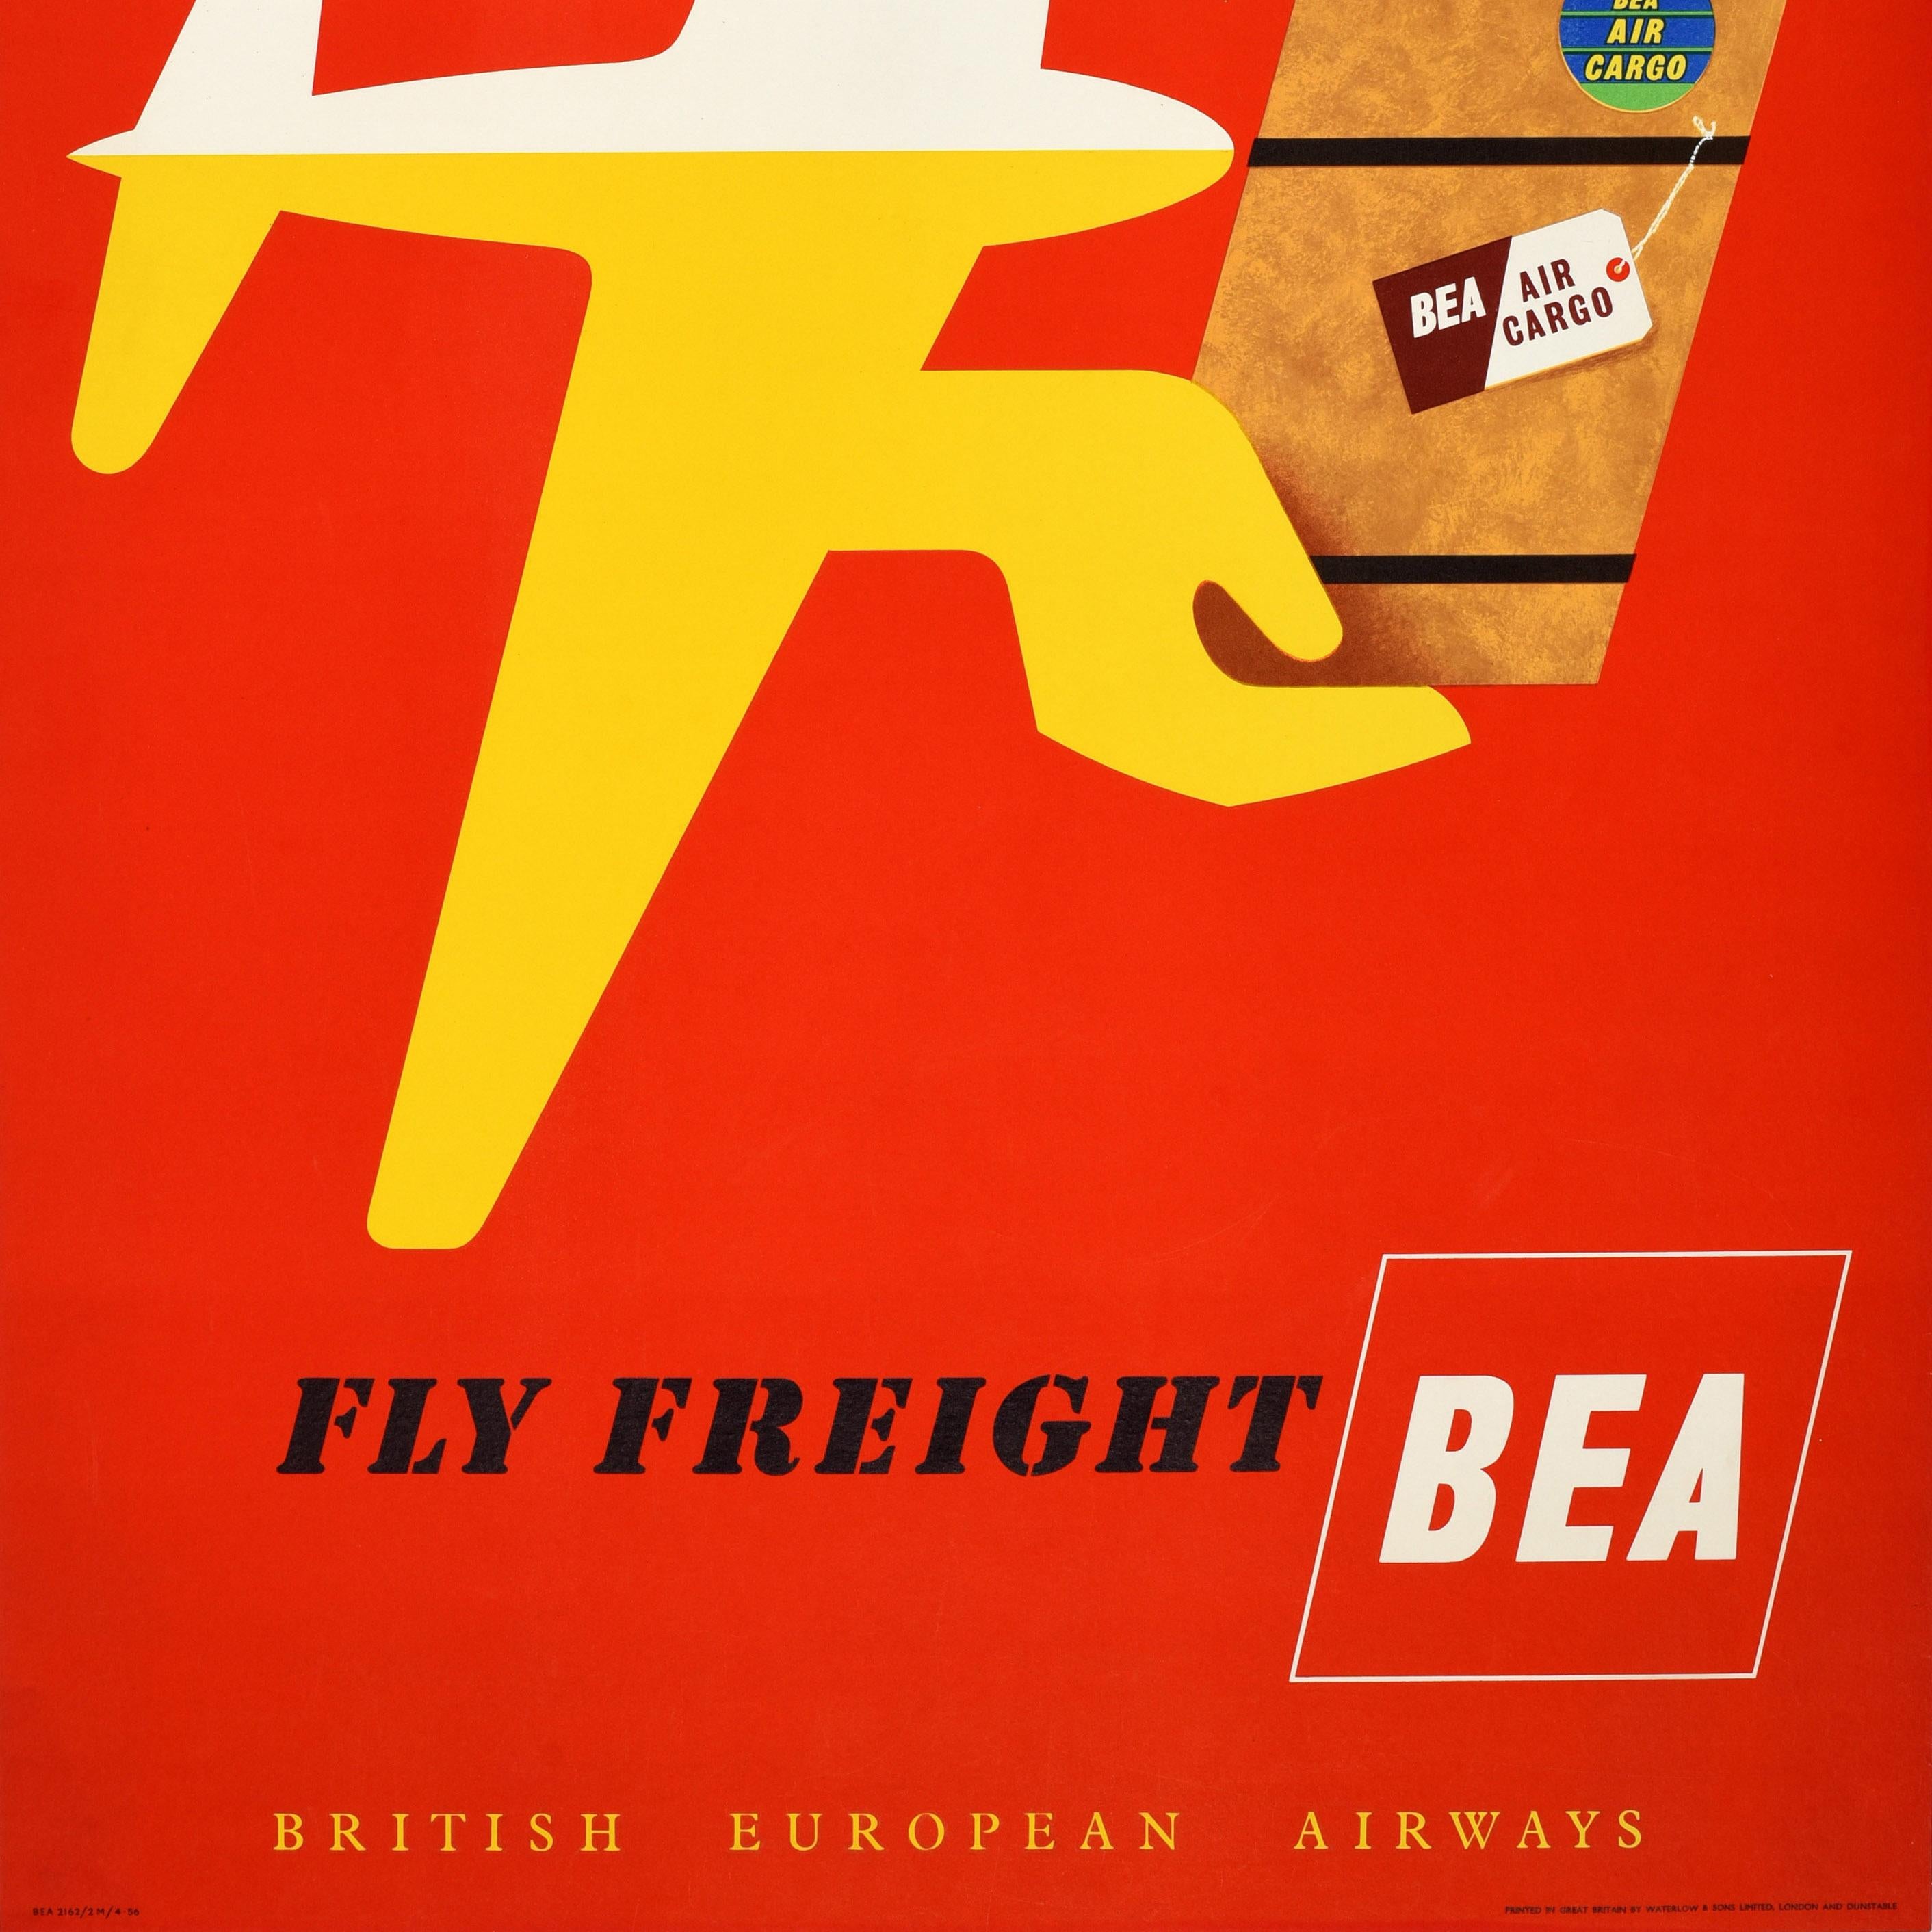 Original Vintage Travel Advertising Poster BEA Fly Freight Abram Games Design In Good Condition For Sale In London, GB